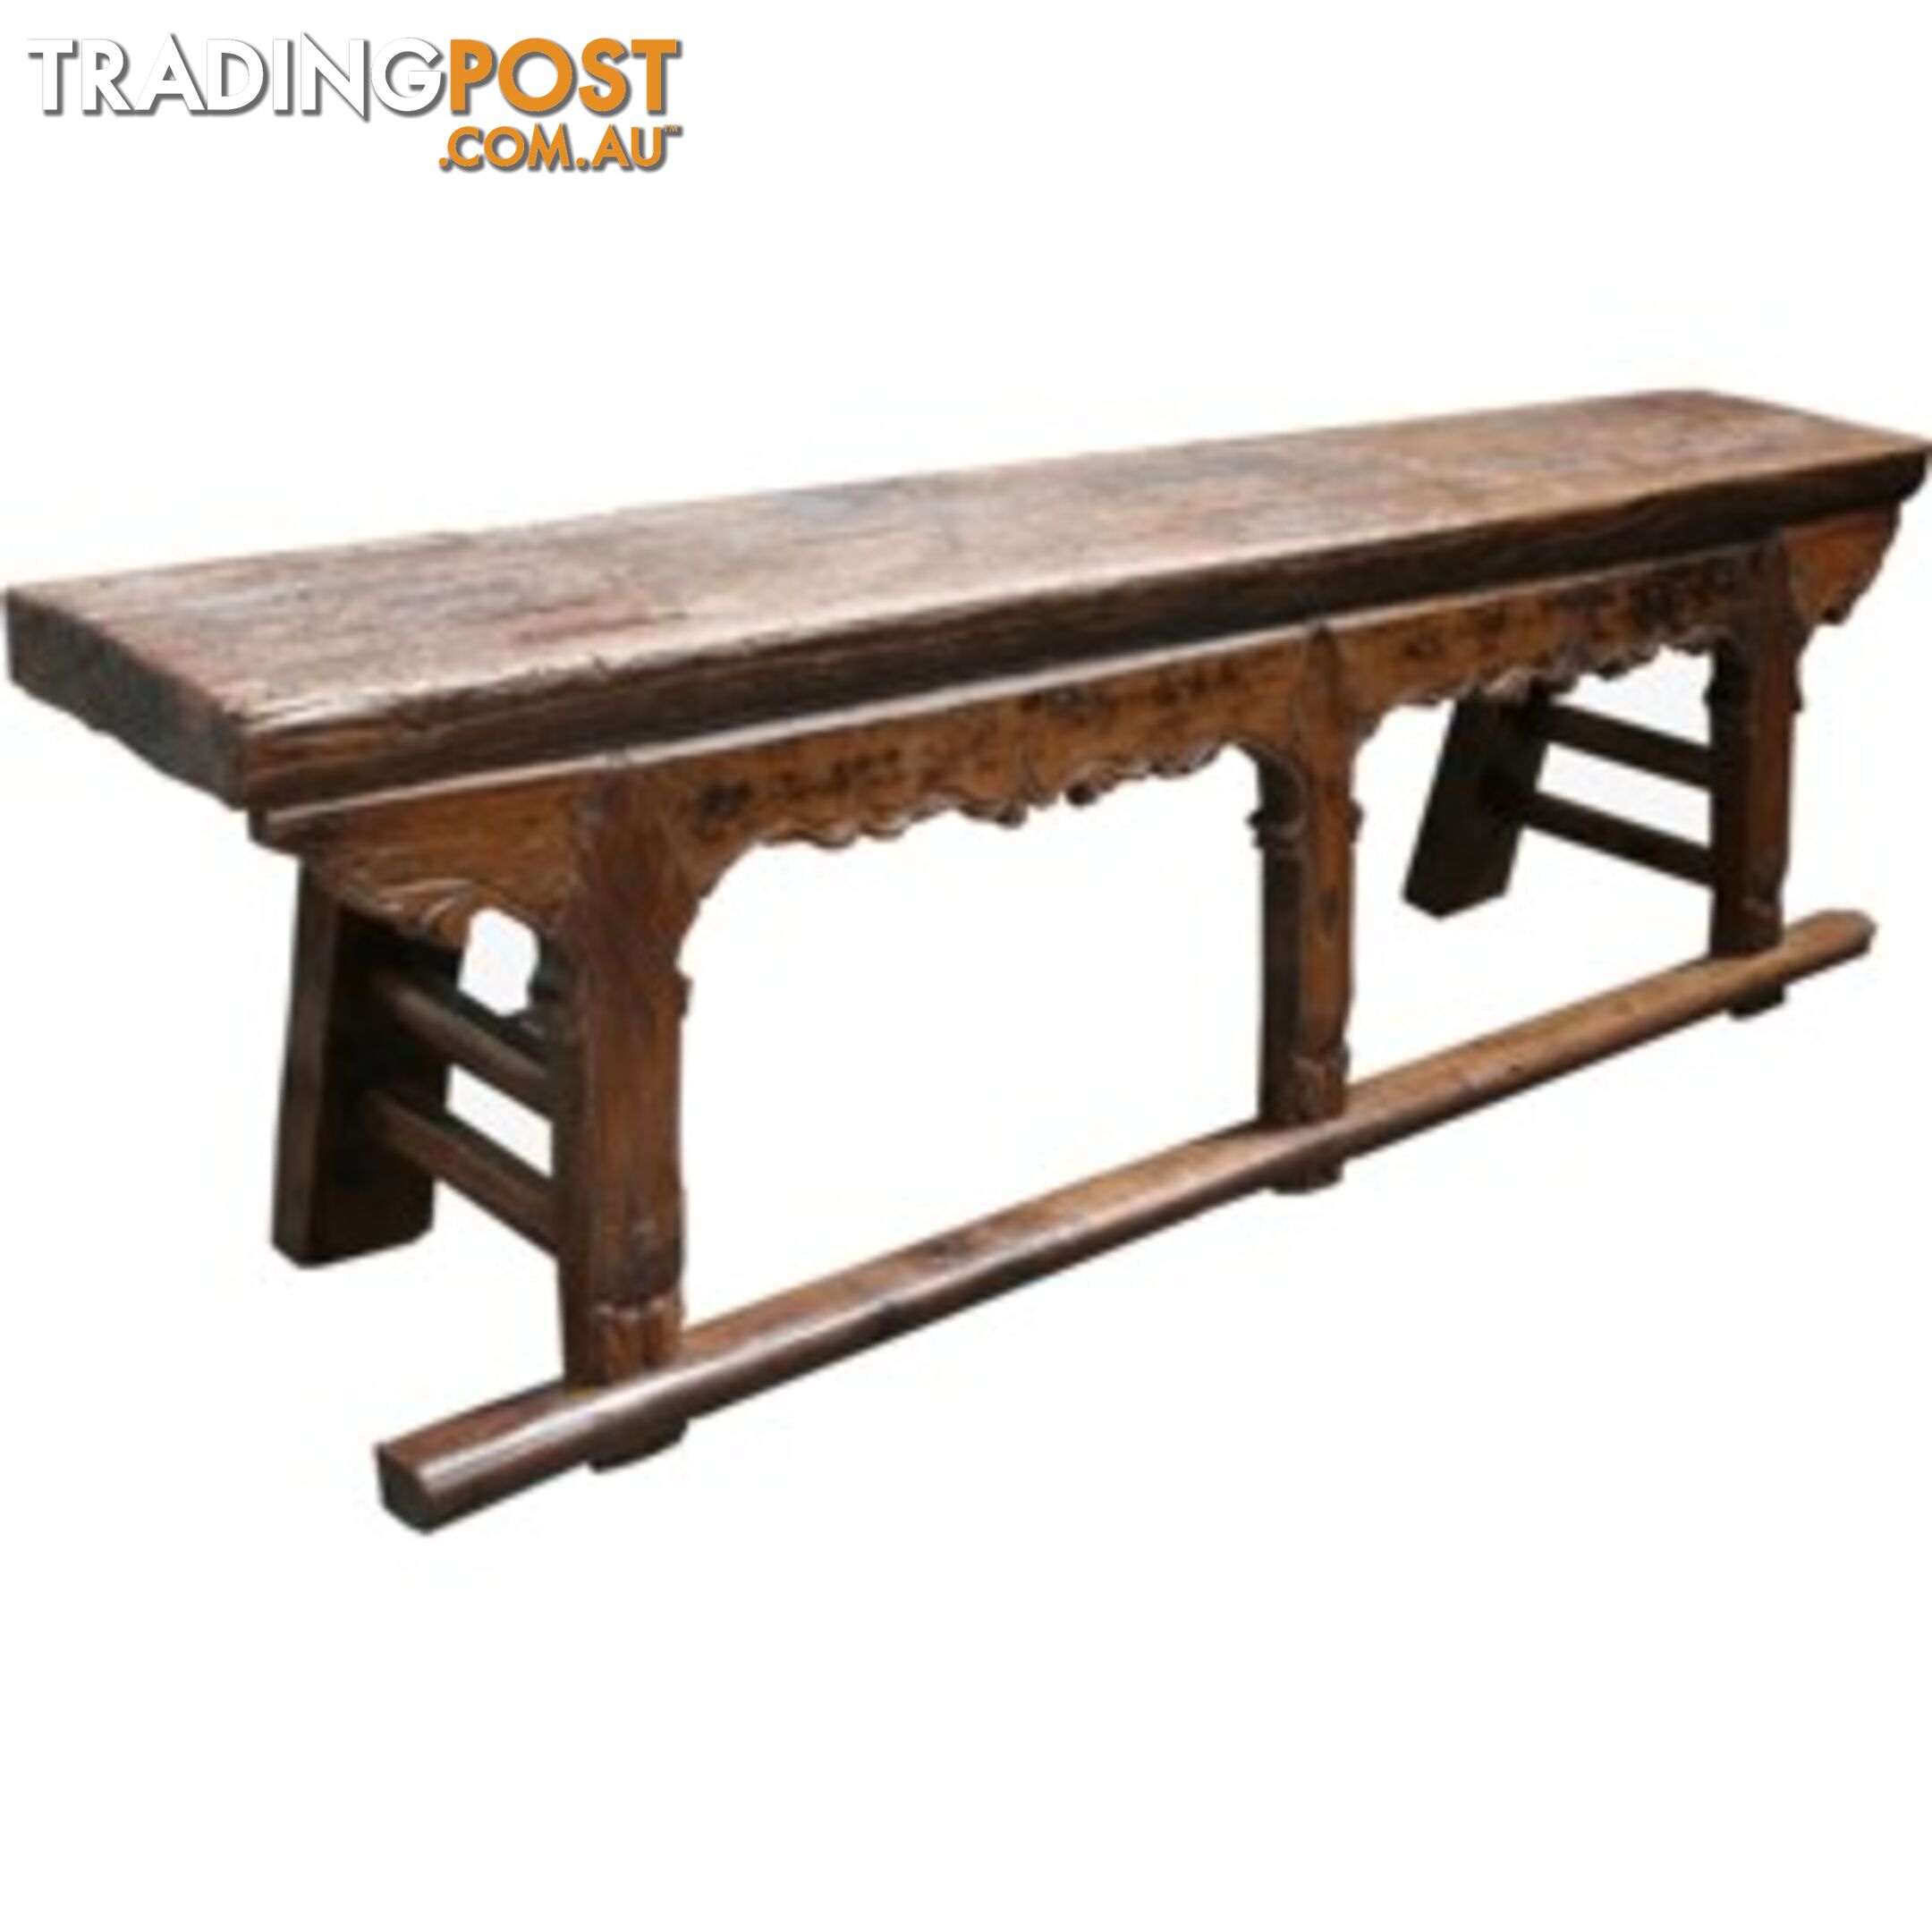 Country Style Chinese Elm Wood Bench